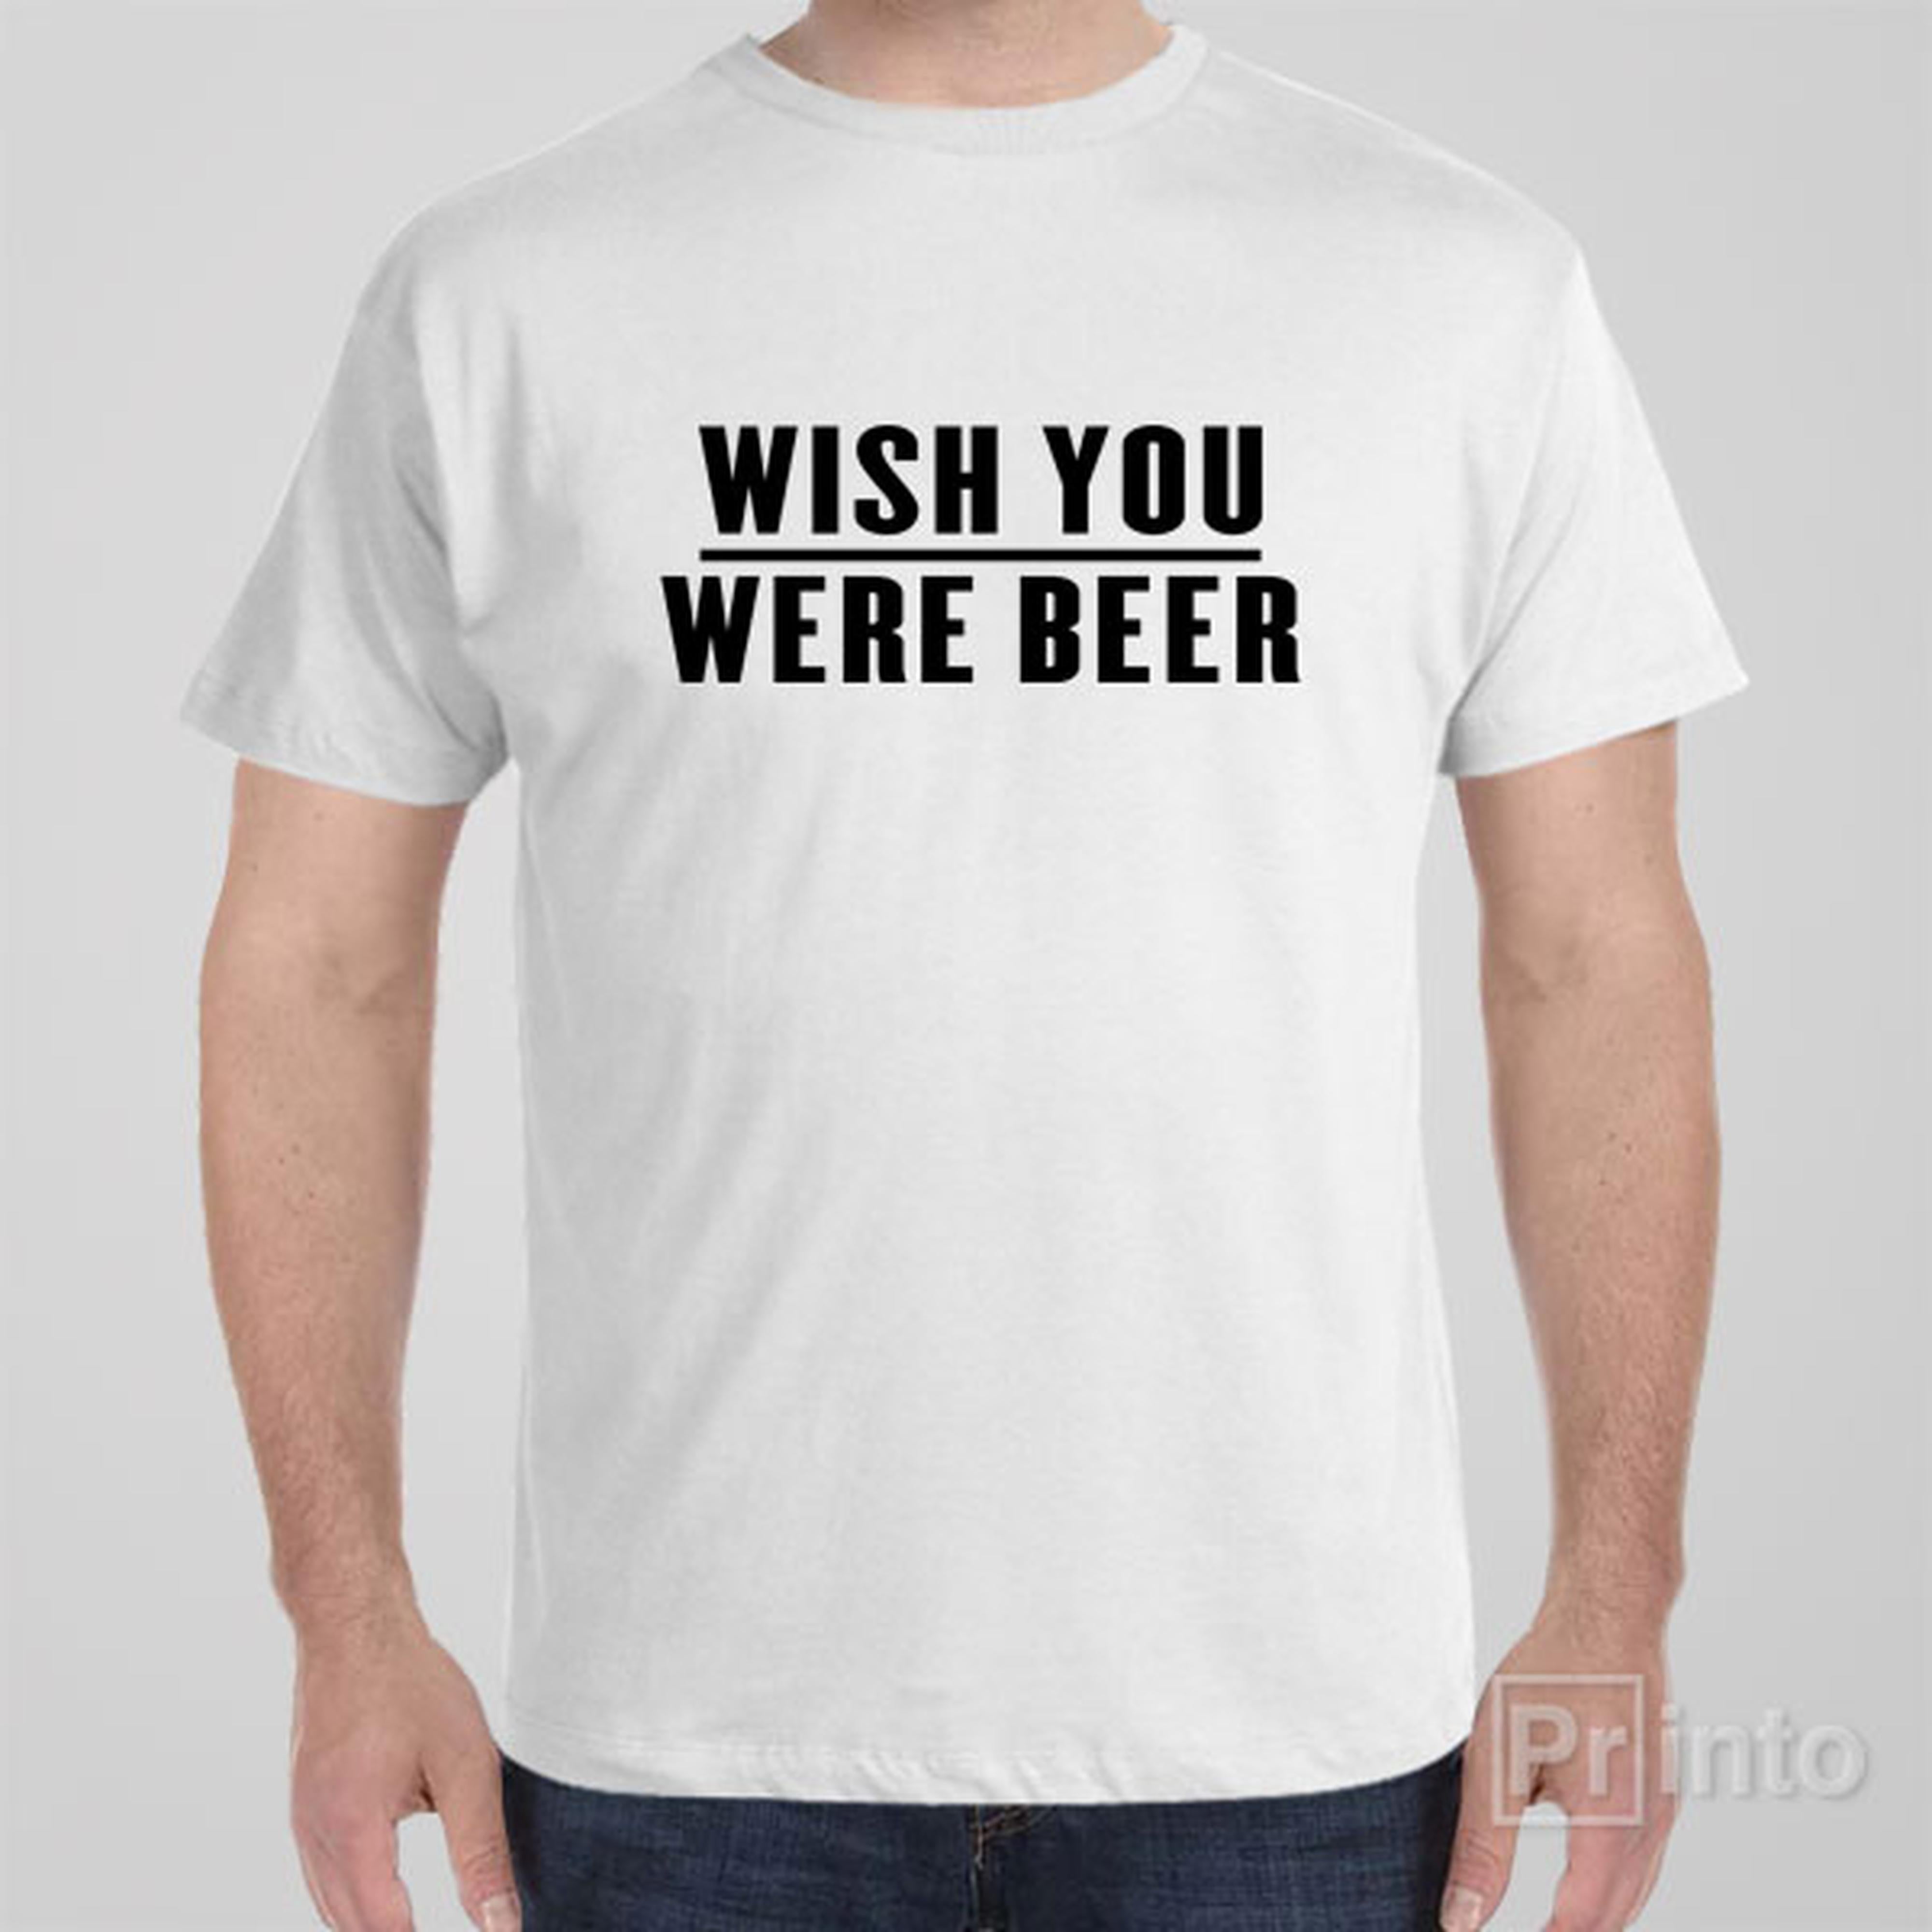 wish-you-were-beer-t-shirt